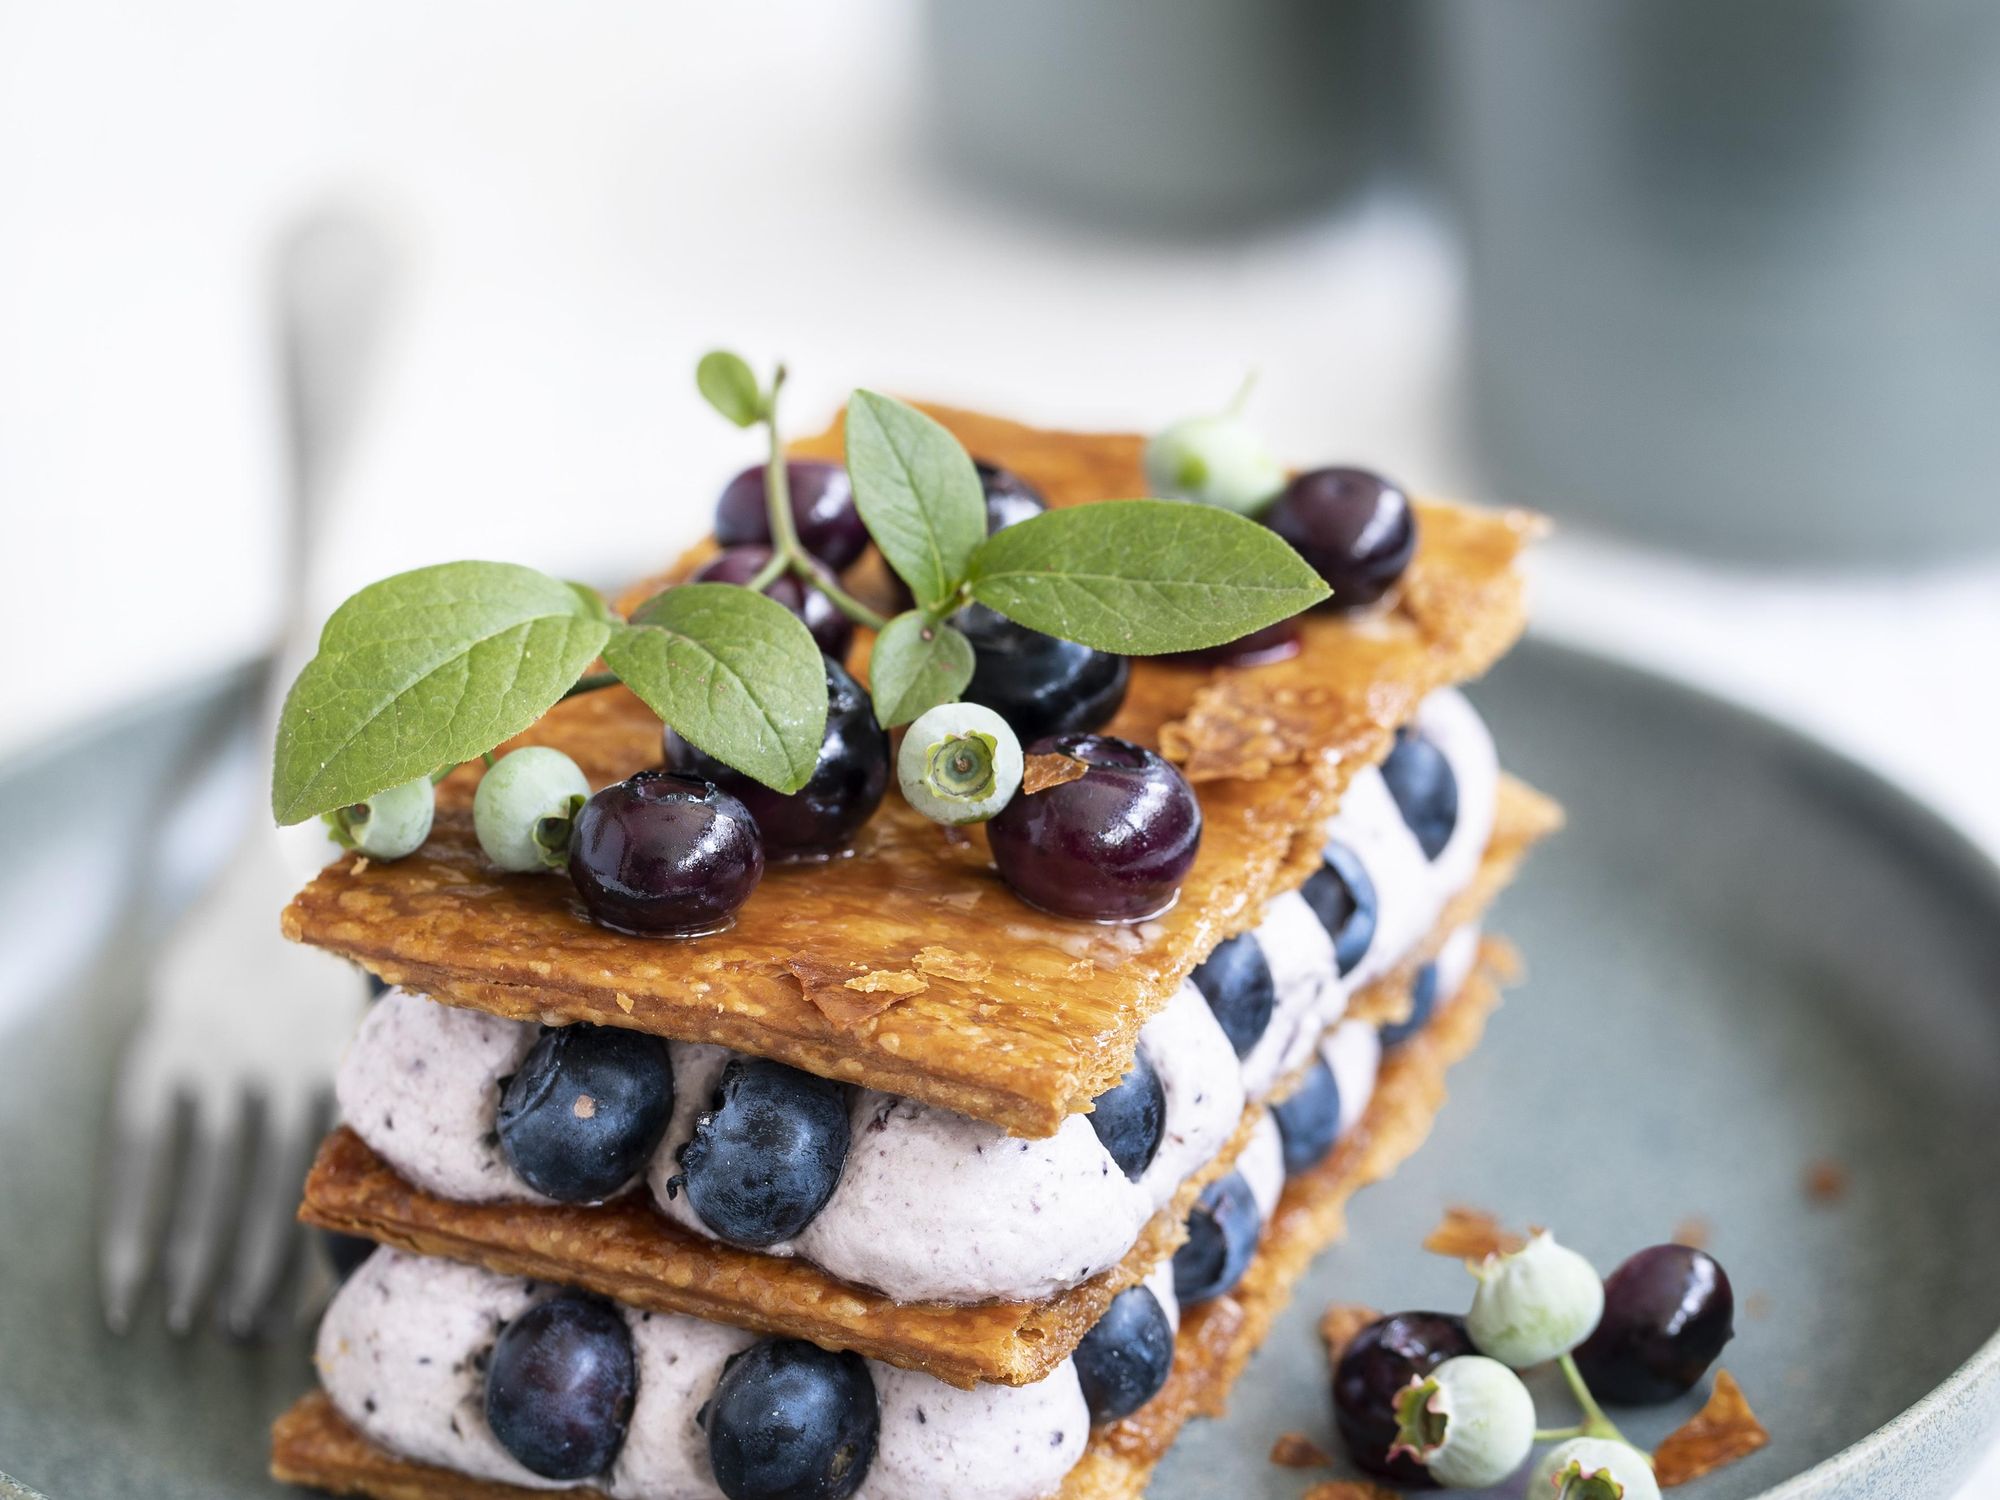 Blueberries mille-feuille